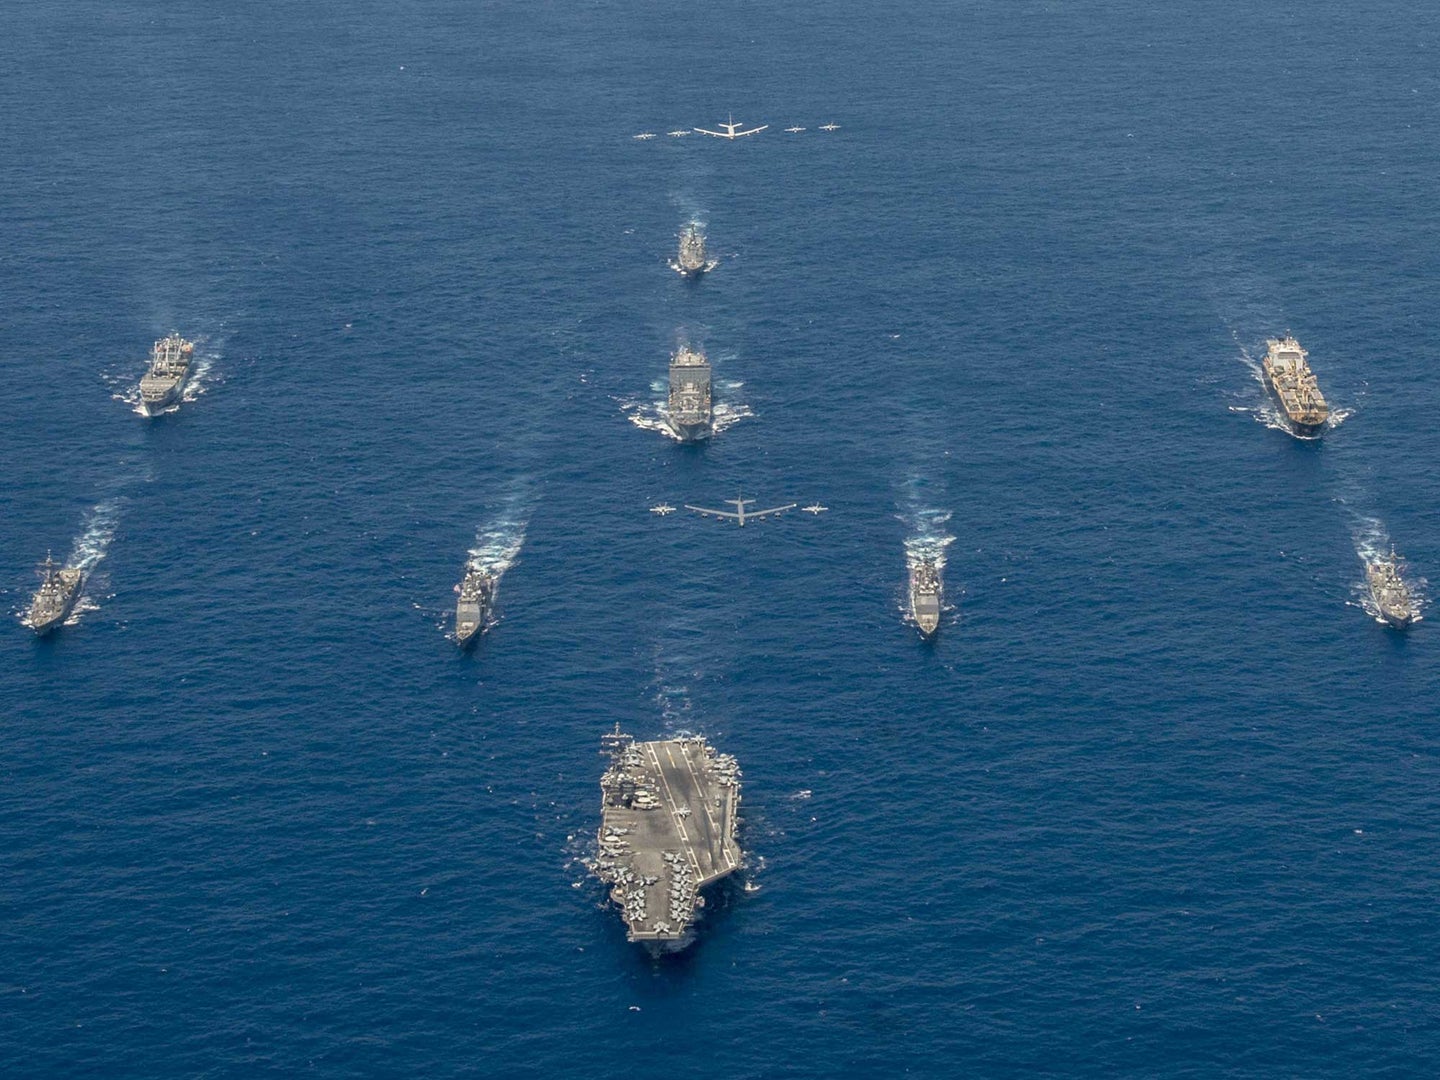 Ships from Standing NATO Maritime Group 2, the Nimitz-class aircraft carrier USS Harry S. Truman (CVN 75), the Arleigh Burke-class guided missile destroyer USS Cole (DDG 67) and Italian Navy Carlo Bergamini-class frigate ITS Alpino (F594) sail in formation in the Mediterranean Sea, July 24, 2022.